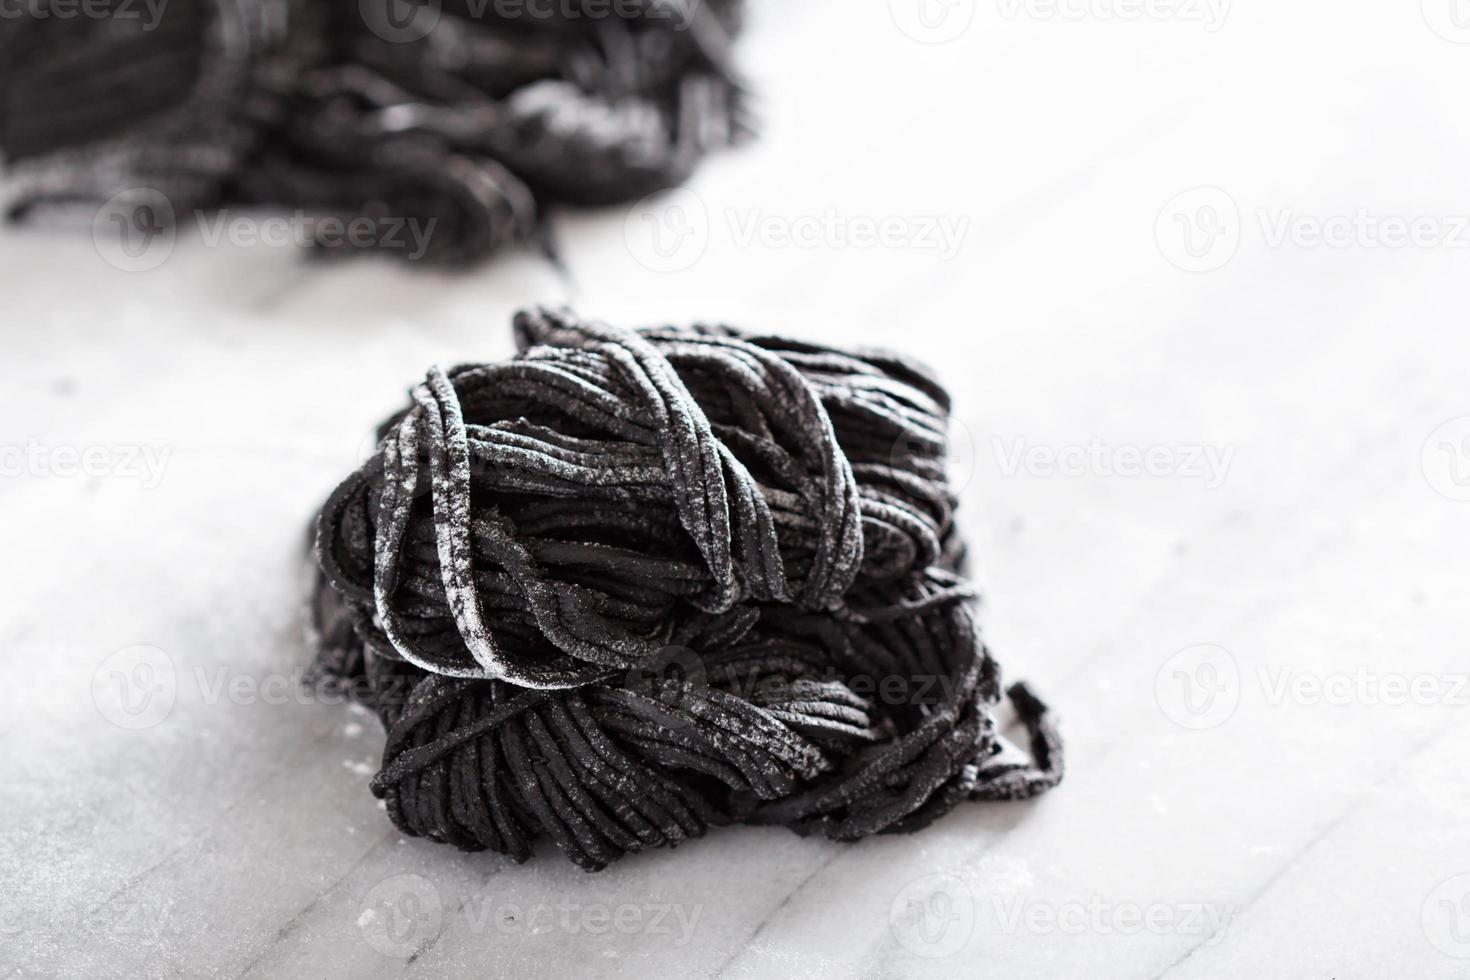 Squid ink homemade pasta on marble photo